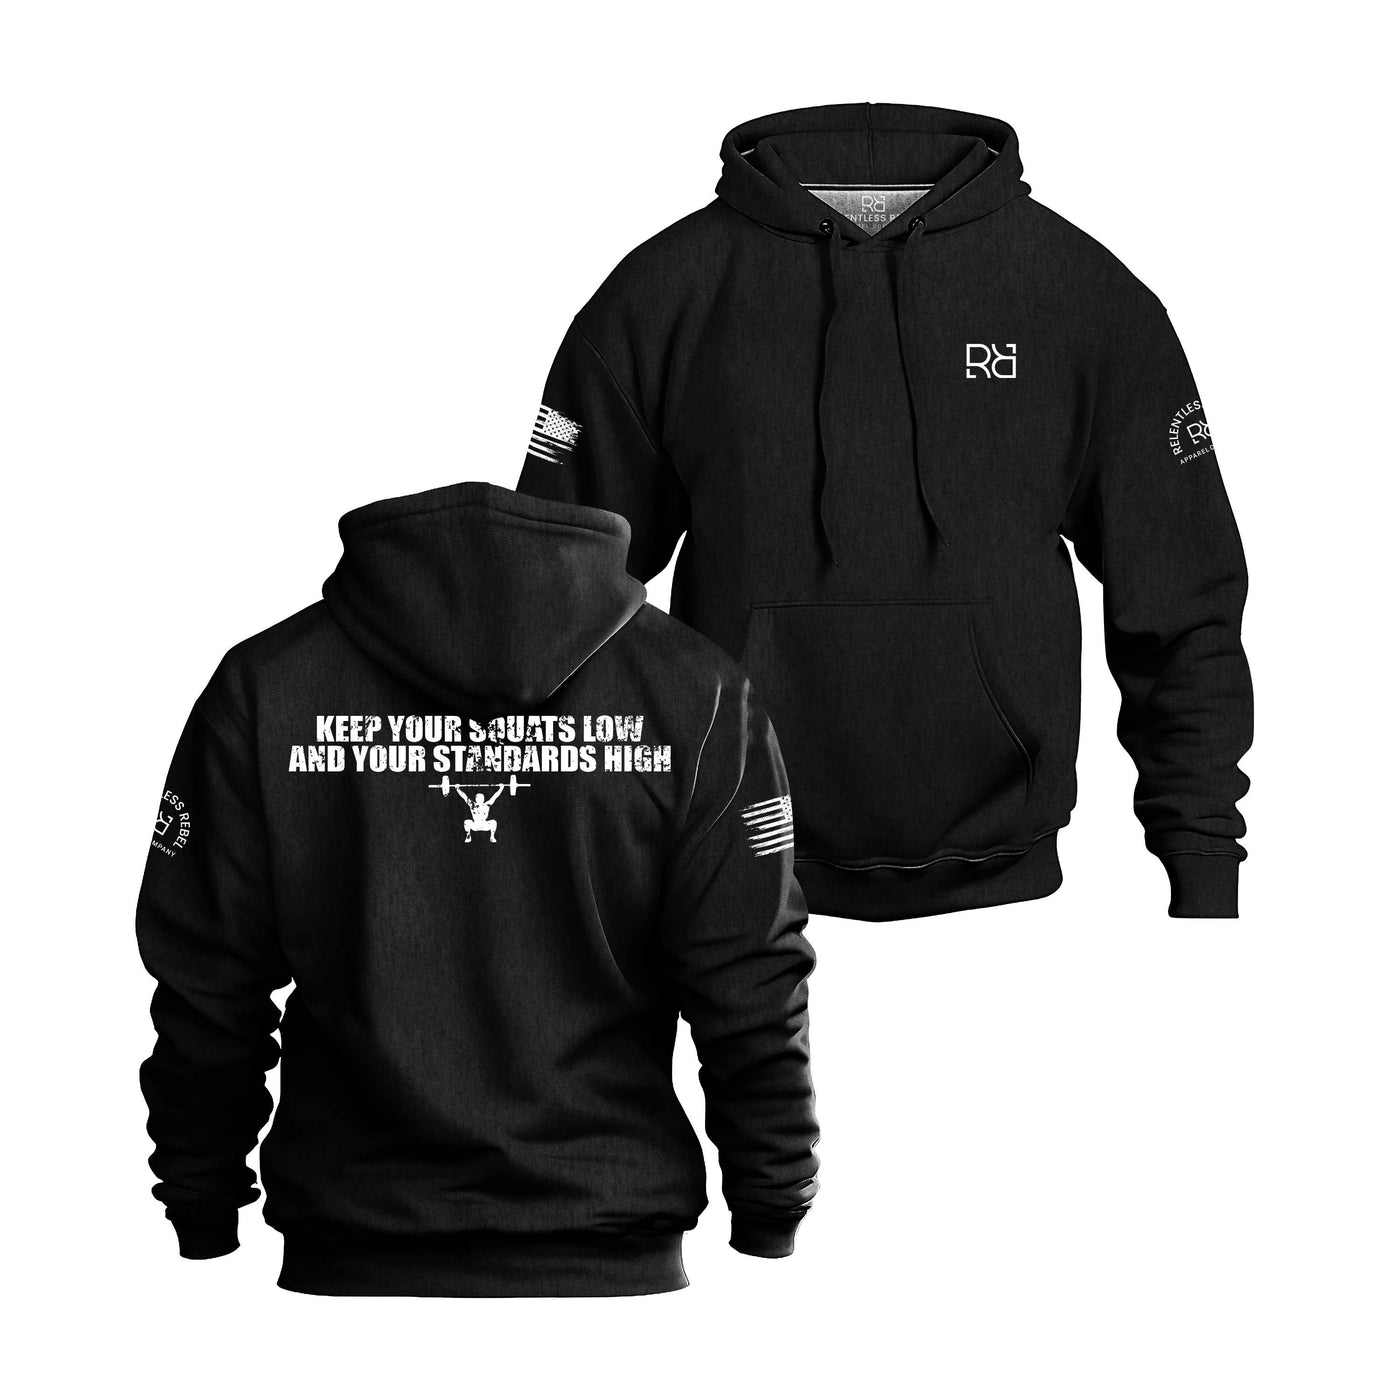 Solid Black Men's Keep Your Squats Low and Your Standards High Back Design Hoodie